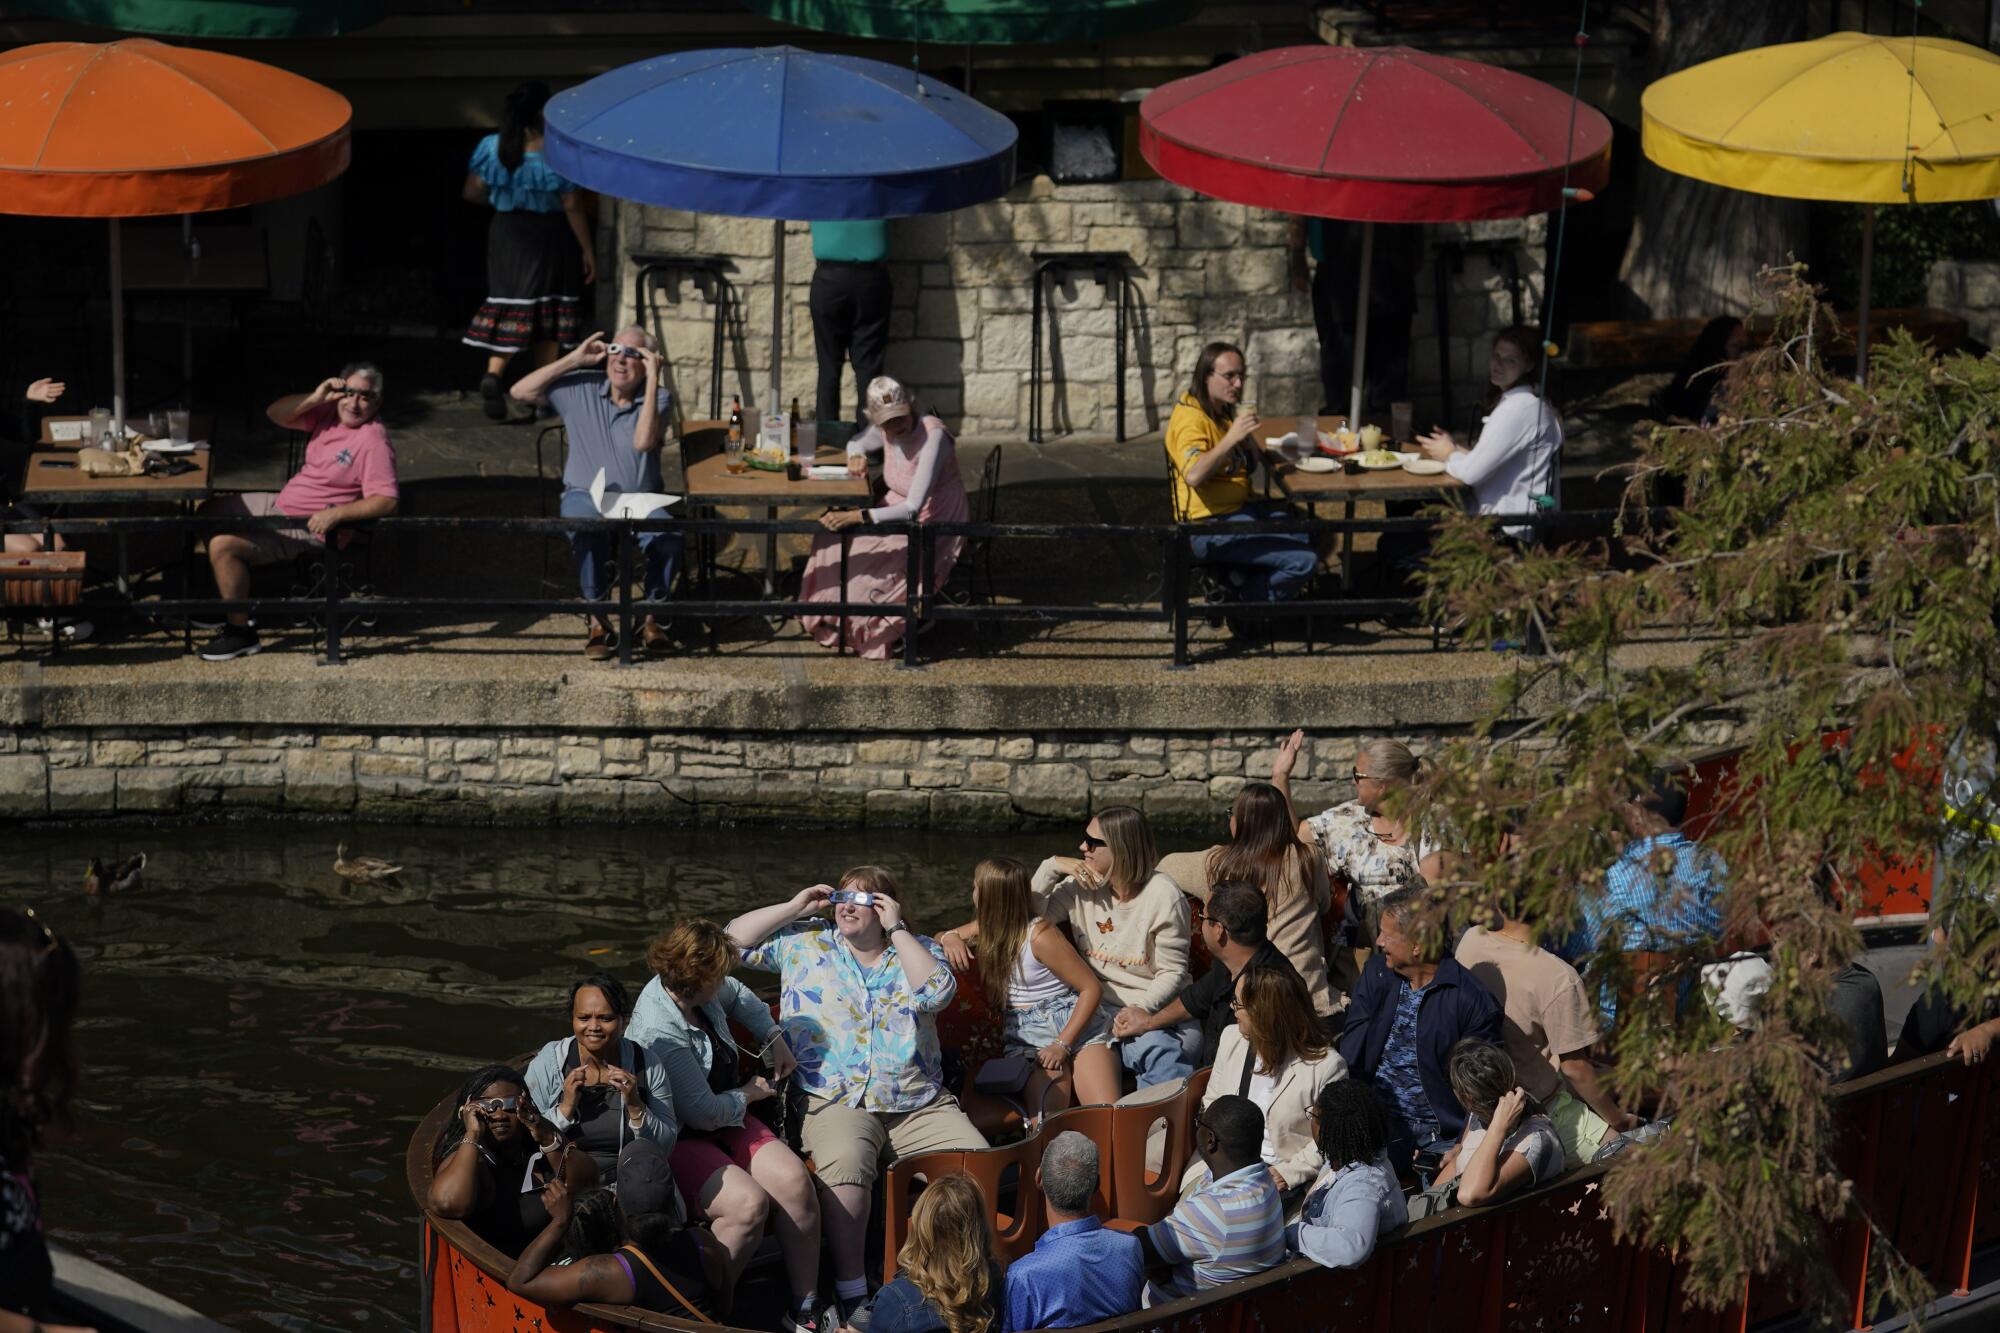 Seated diners and people nearby on a river barge in San Antonio use special glasses to watch the eclipse.